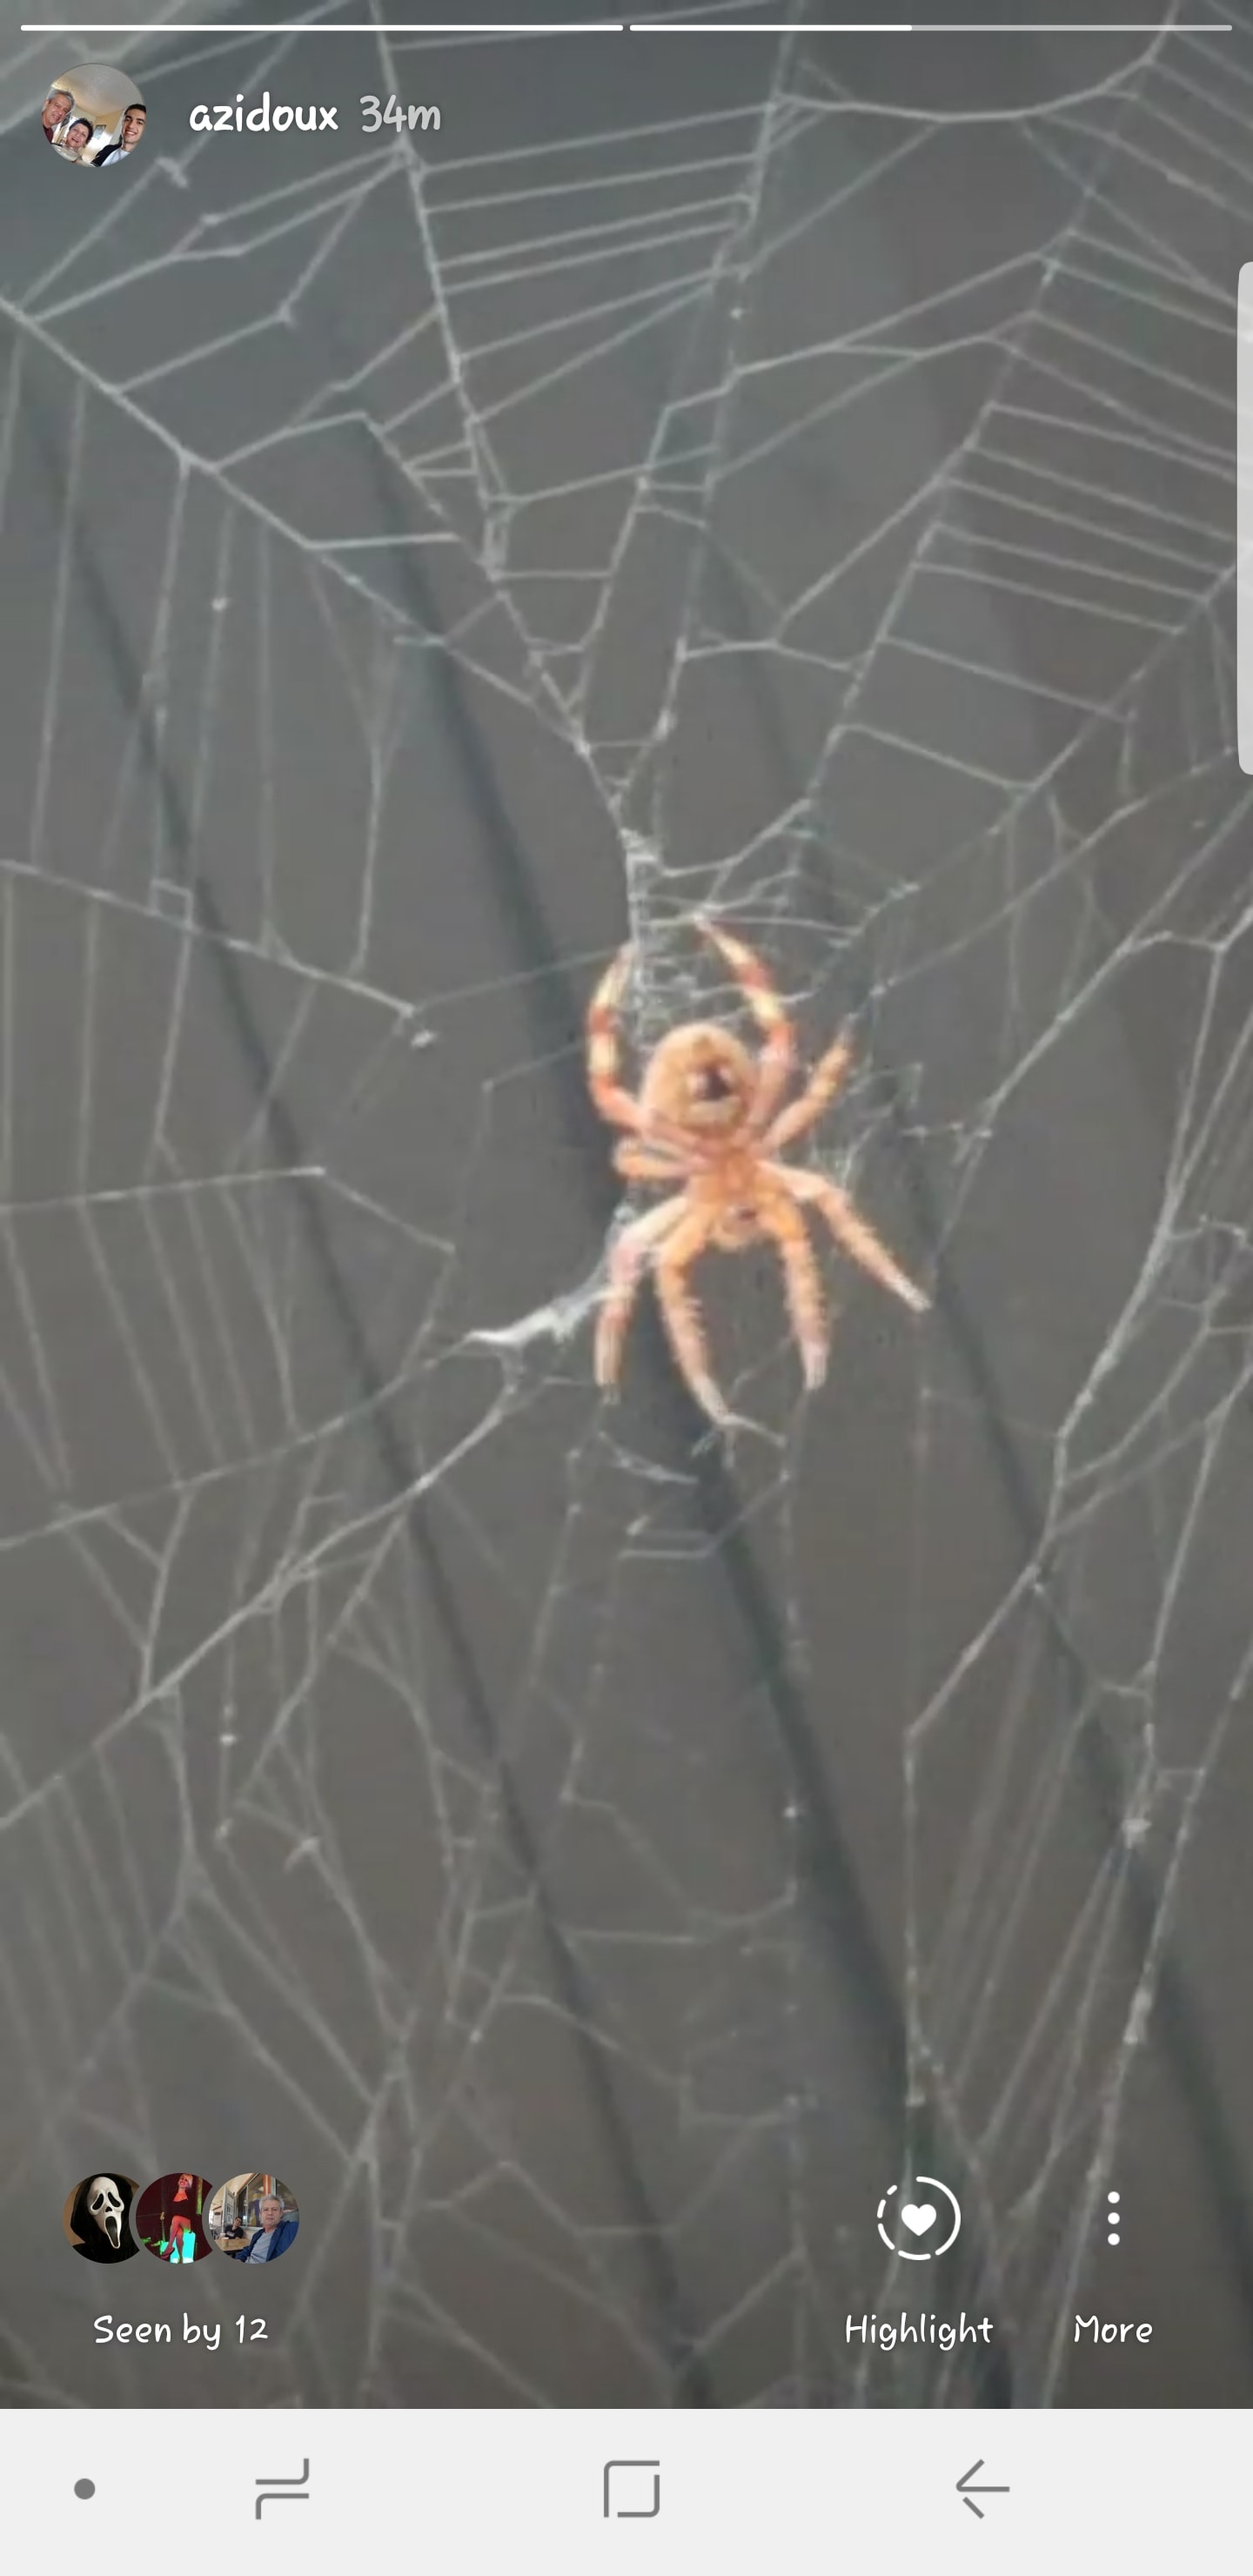 Picture of Neoscona (Spotted Orb-weavers) - Ventral,Webs